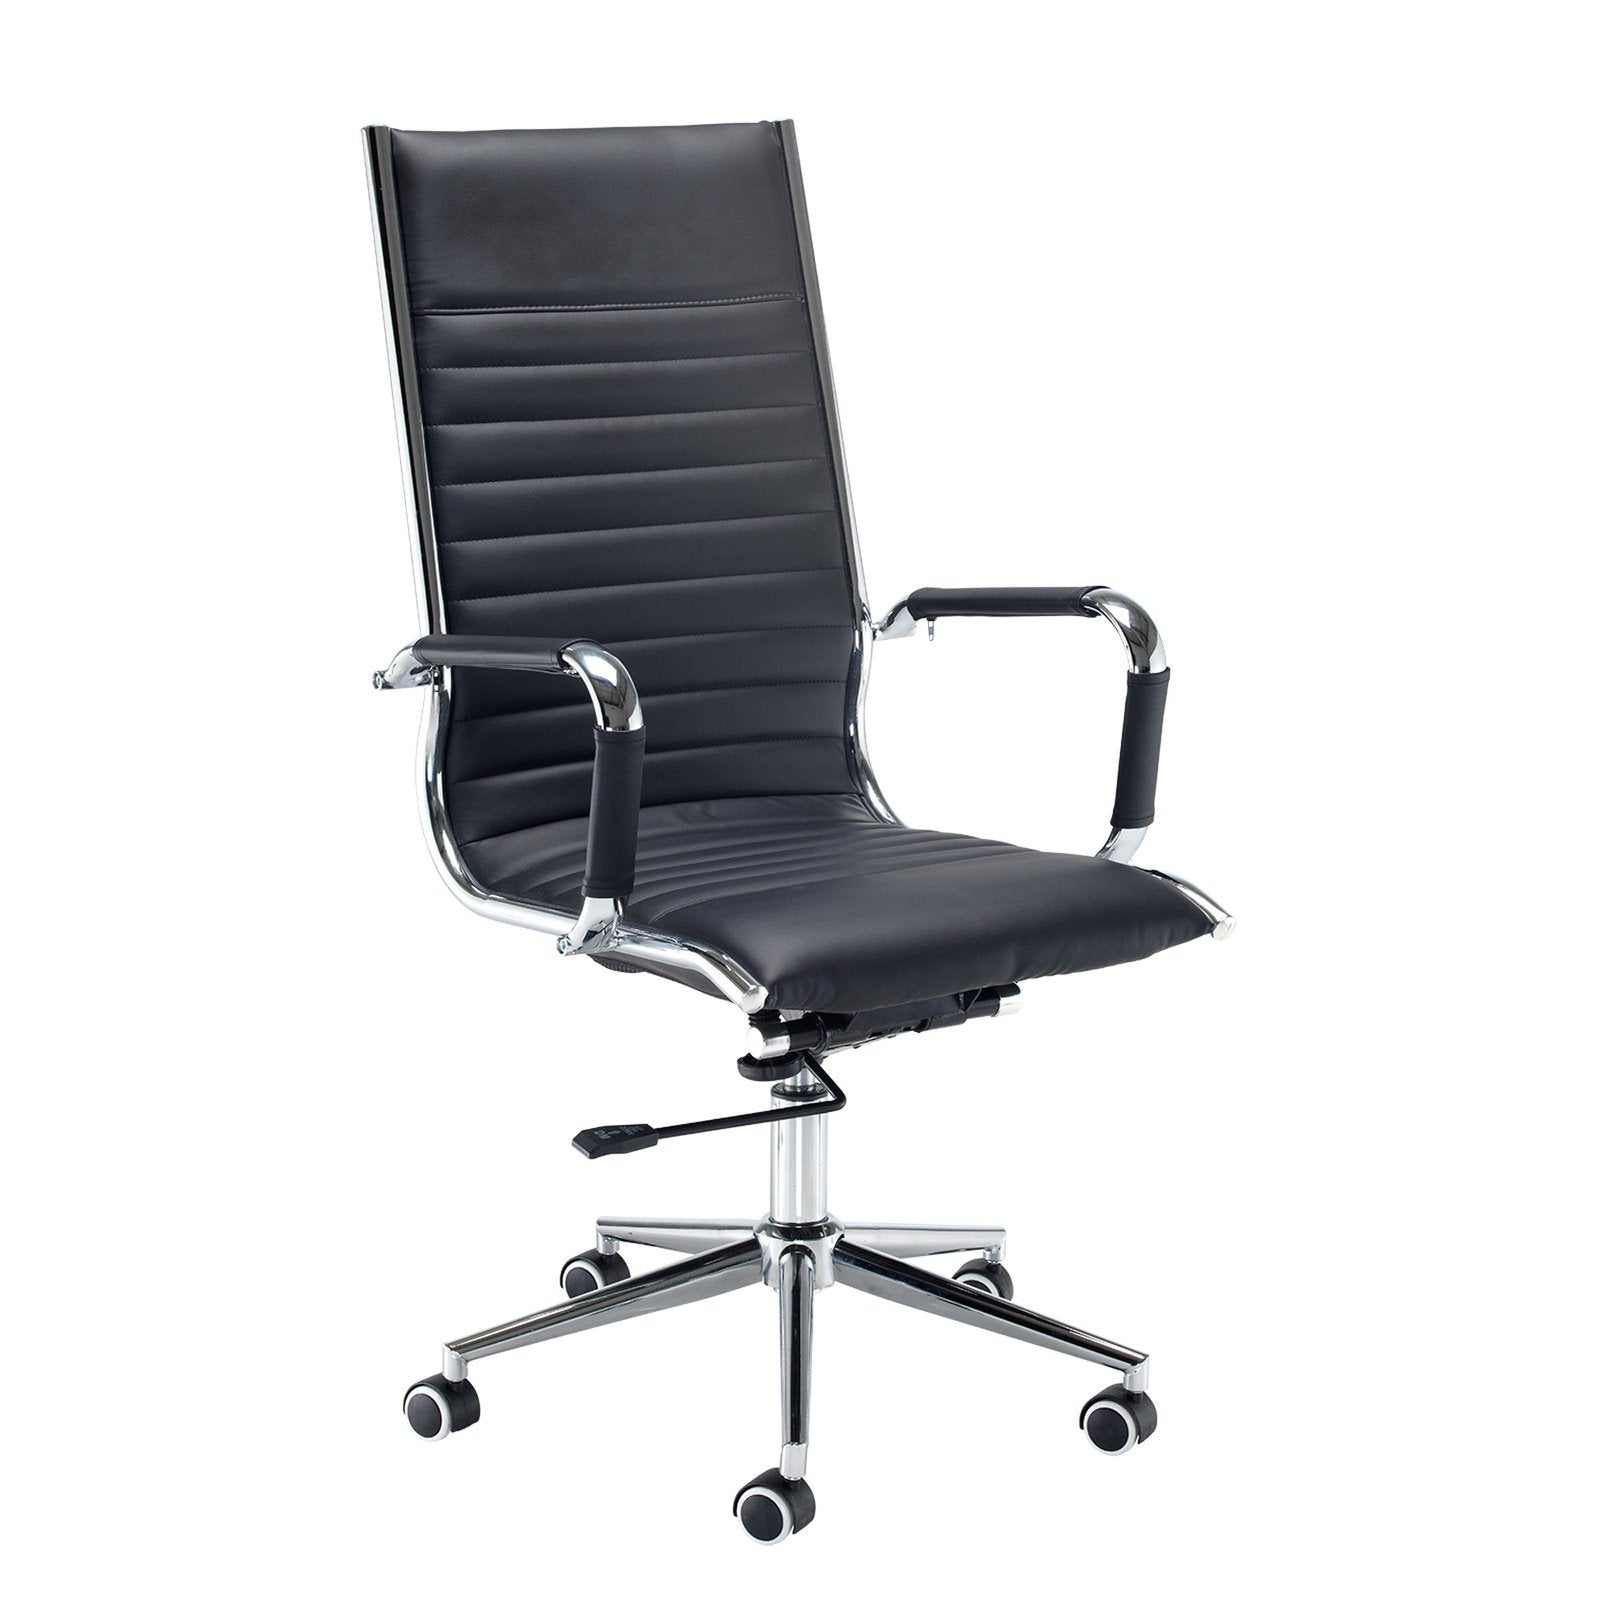 Bari executive chair - black faux leather - Office Products Online